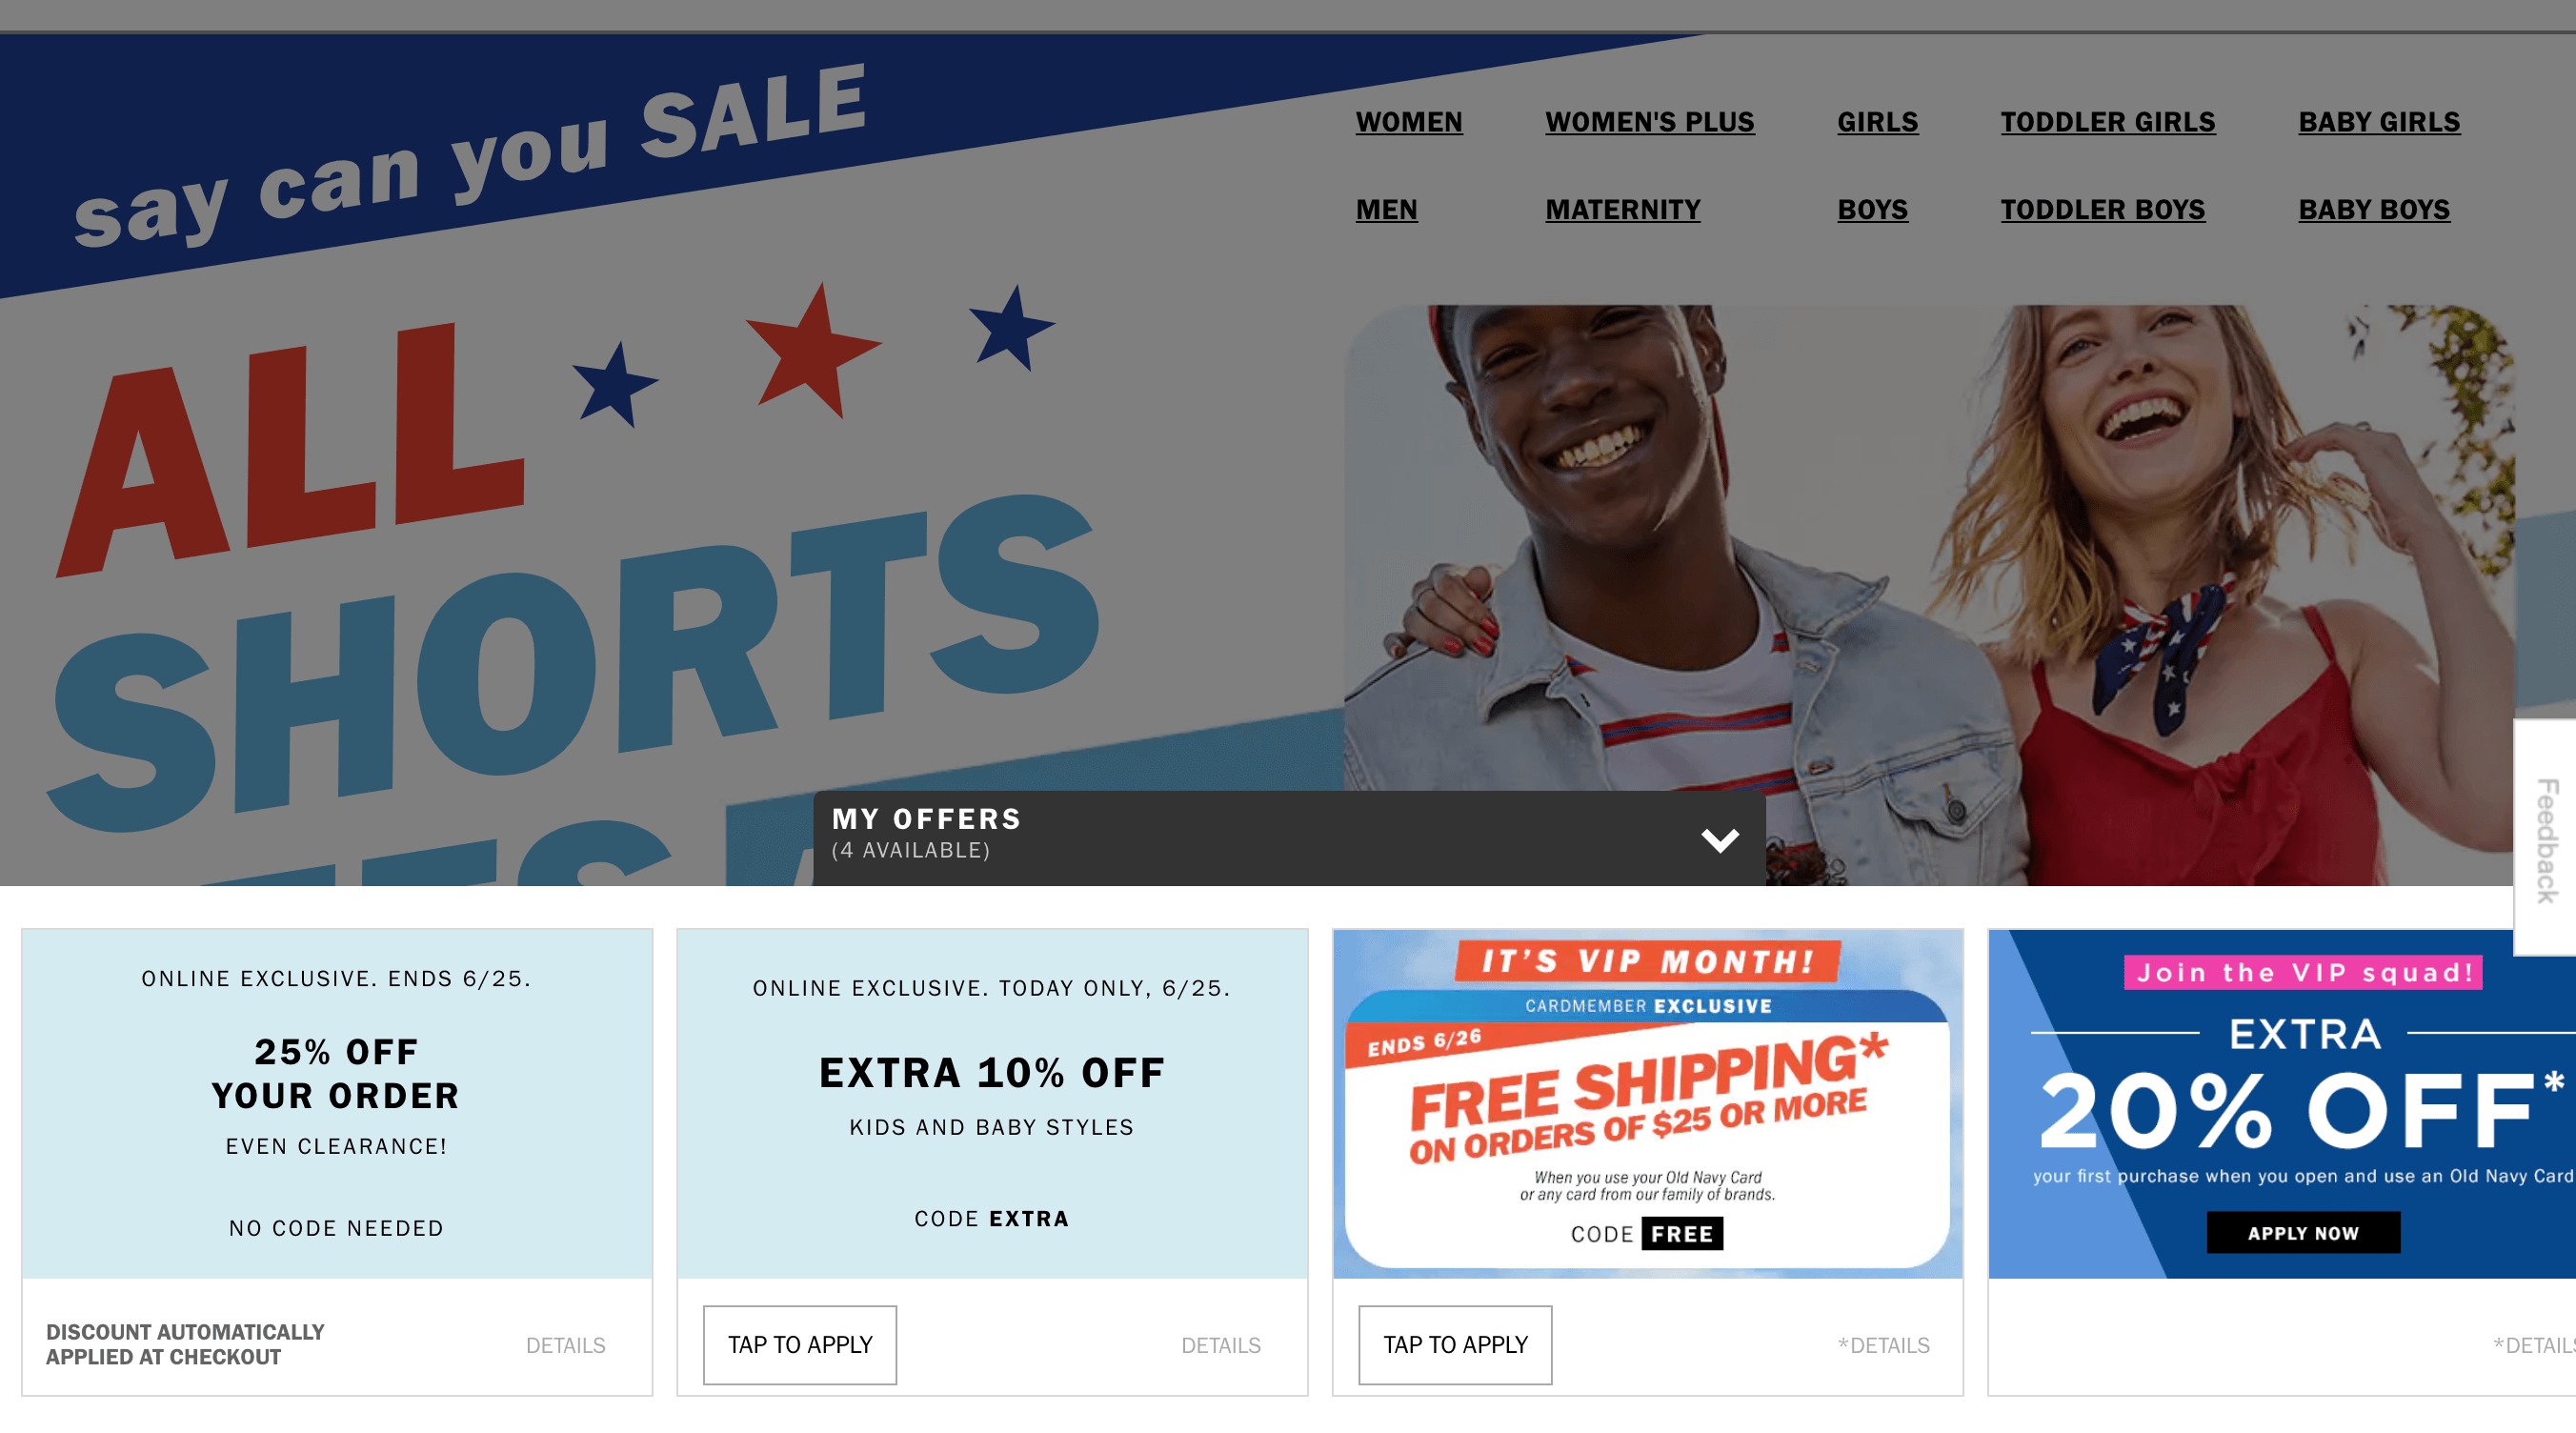 18 Discount Code Ideas to Get More Deals [+Examples]